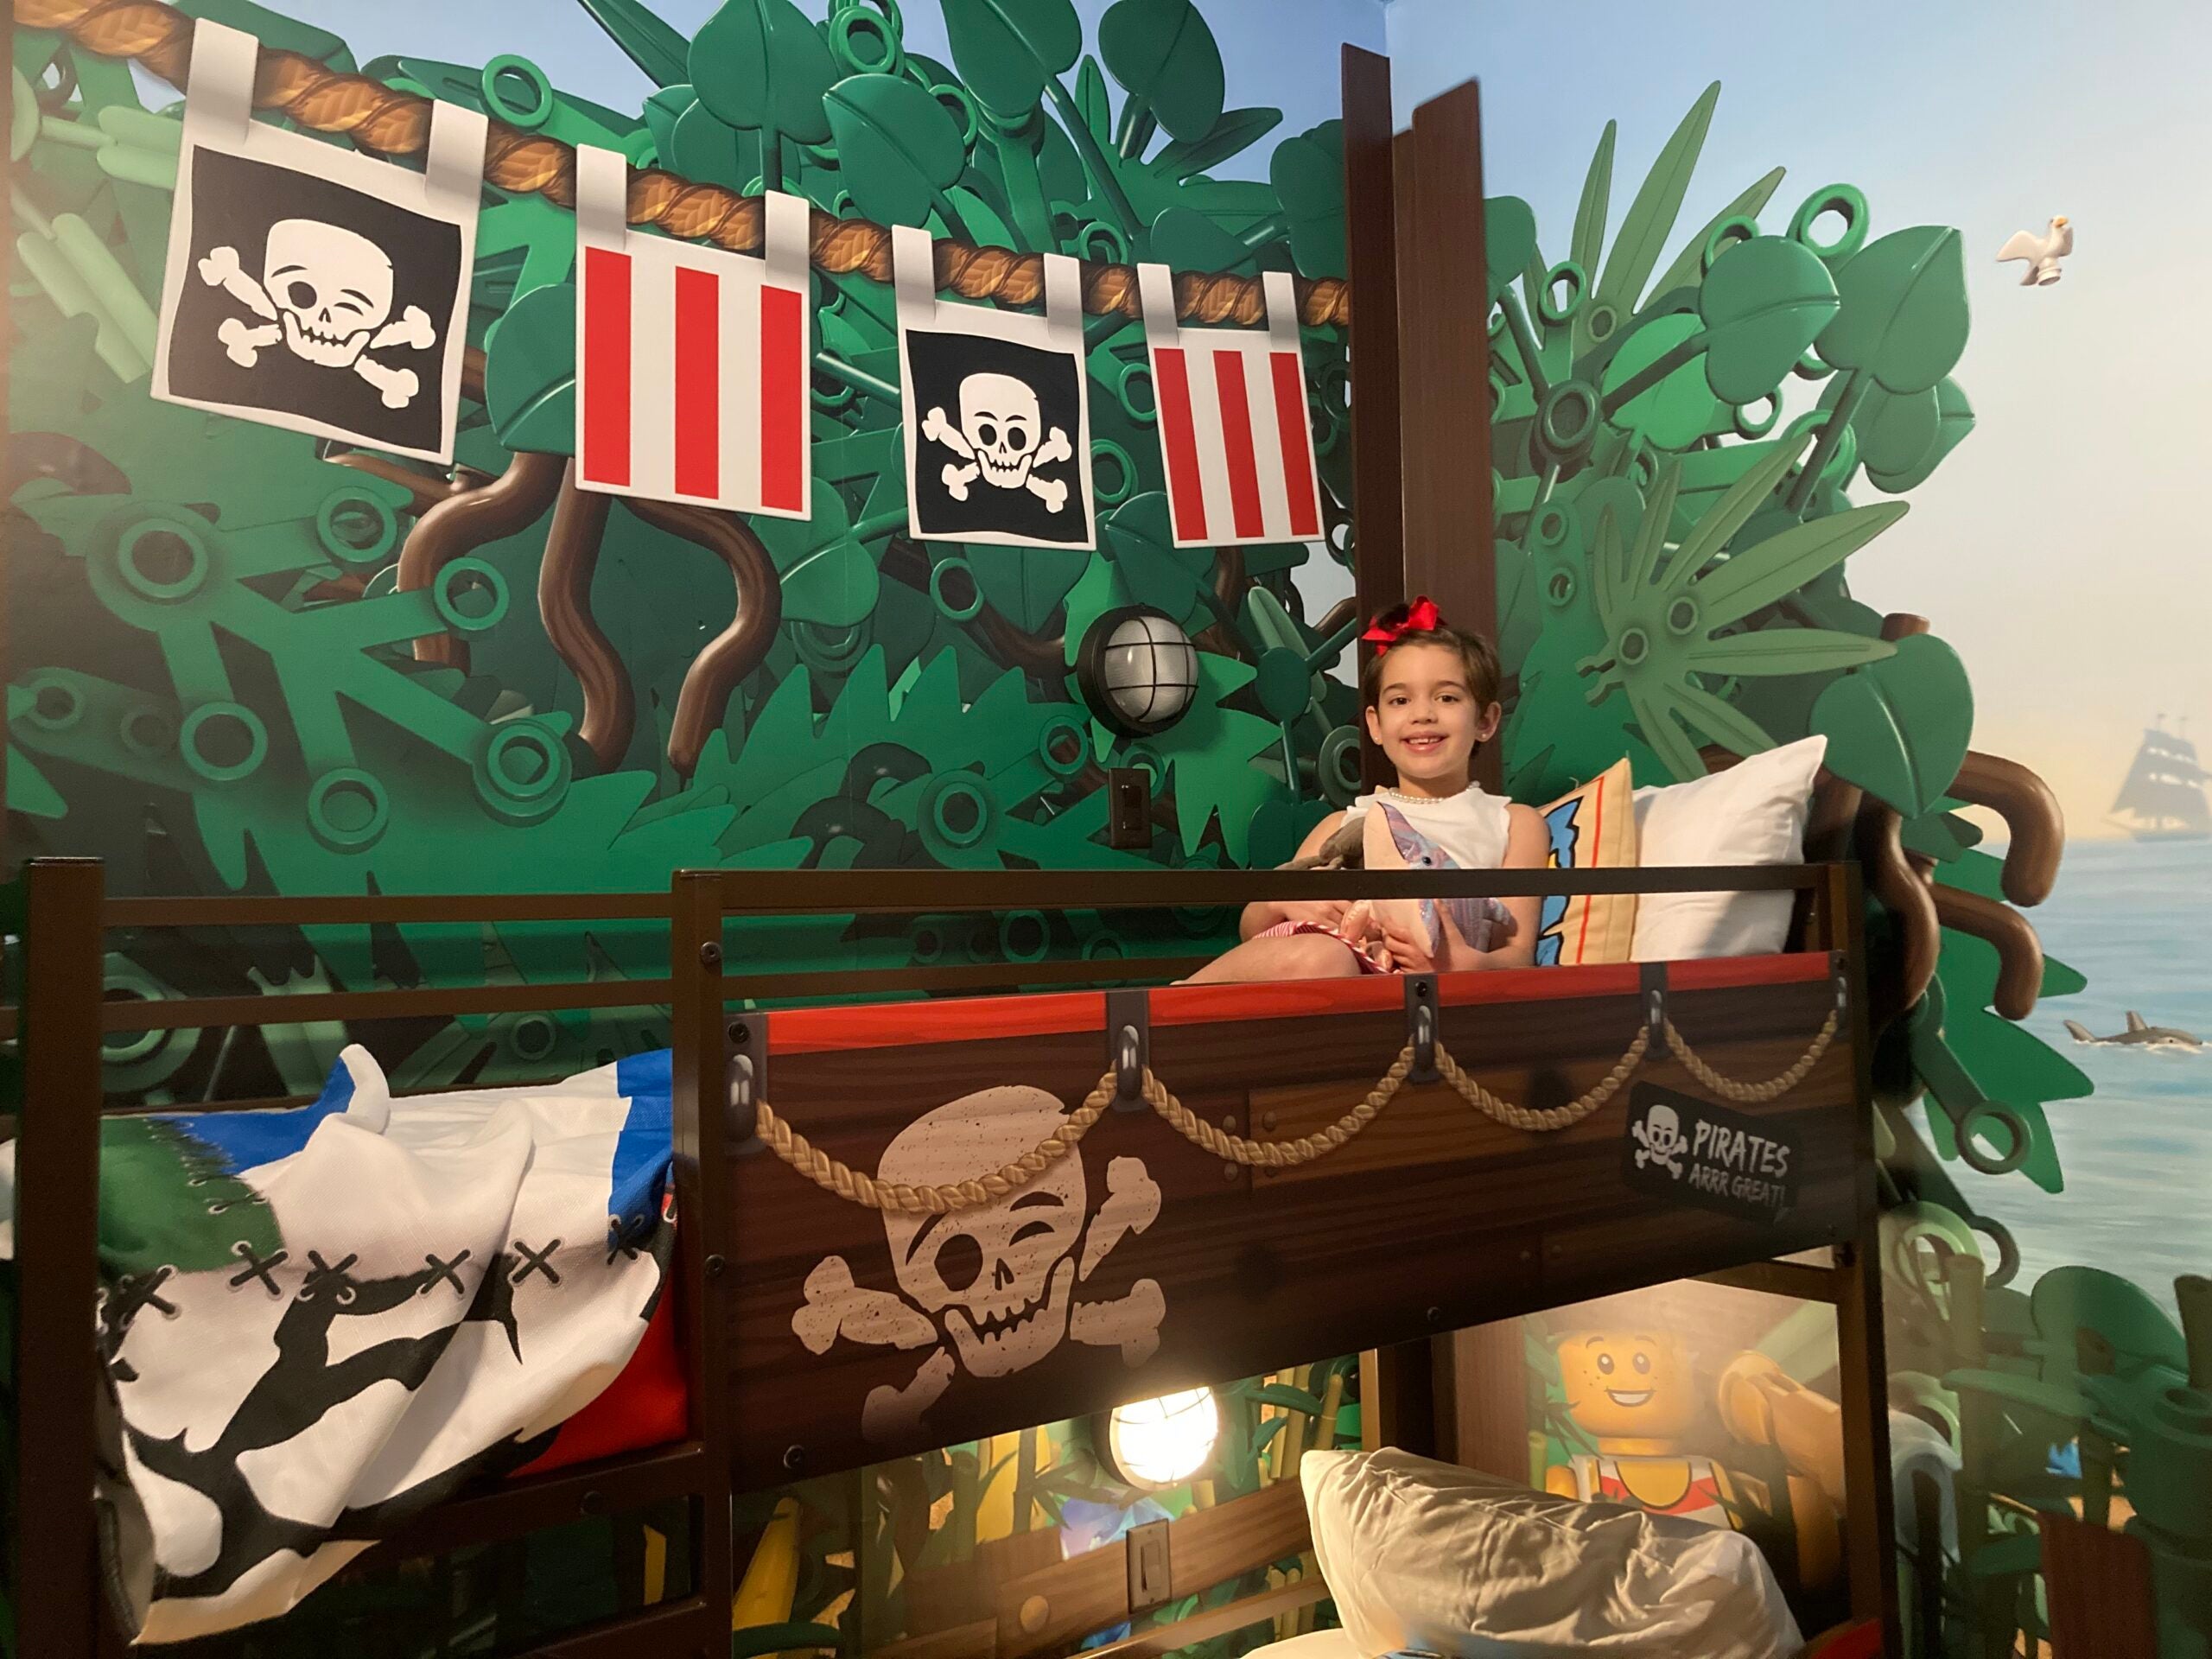 The author's daughter in her bed at Pirate Island Hotel at Legoland Florida